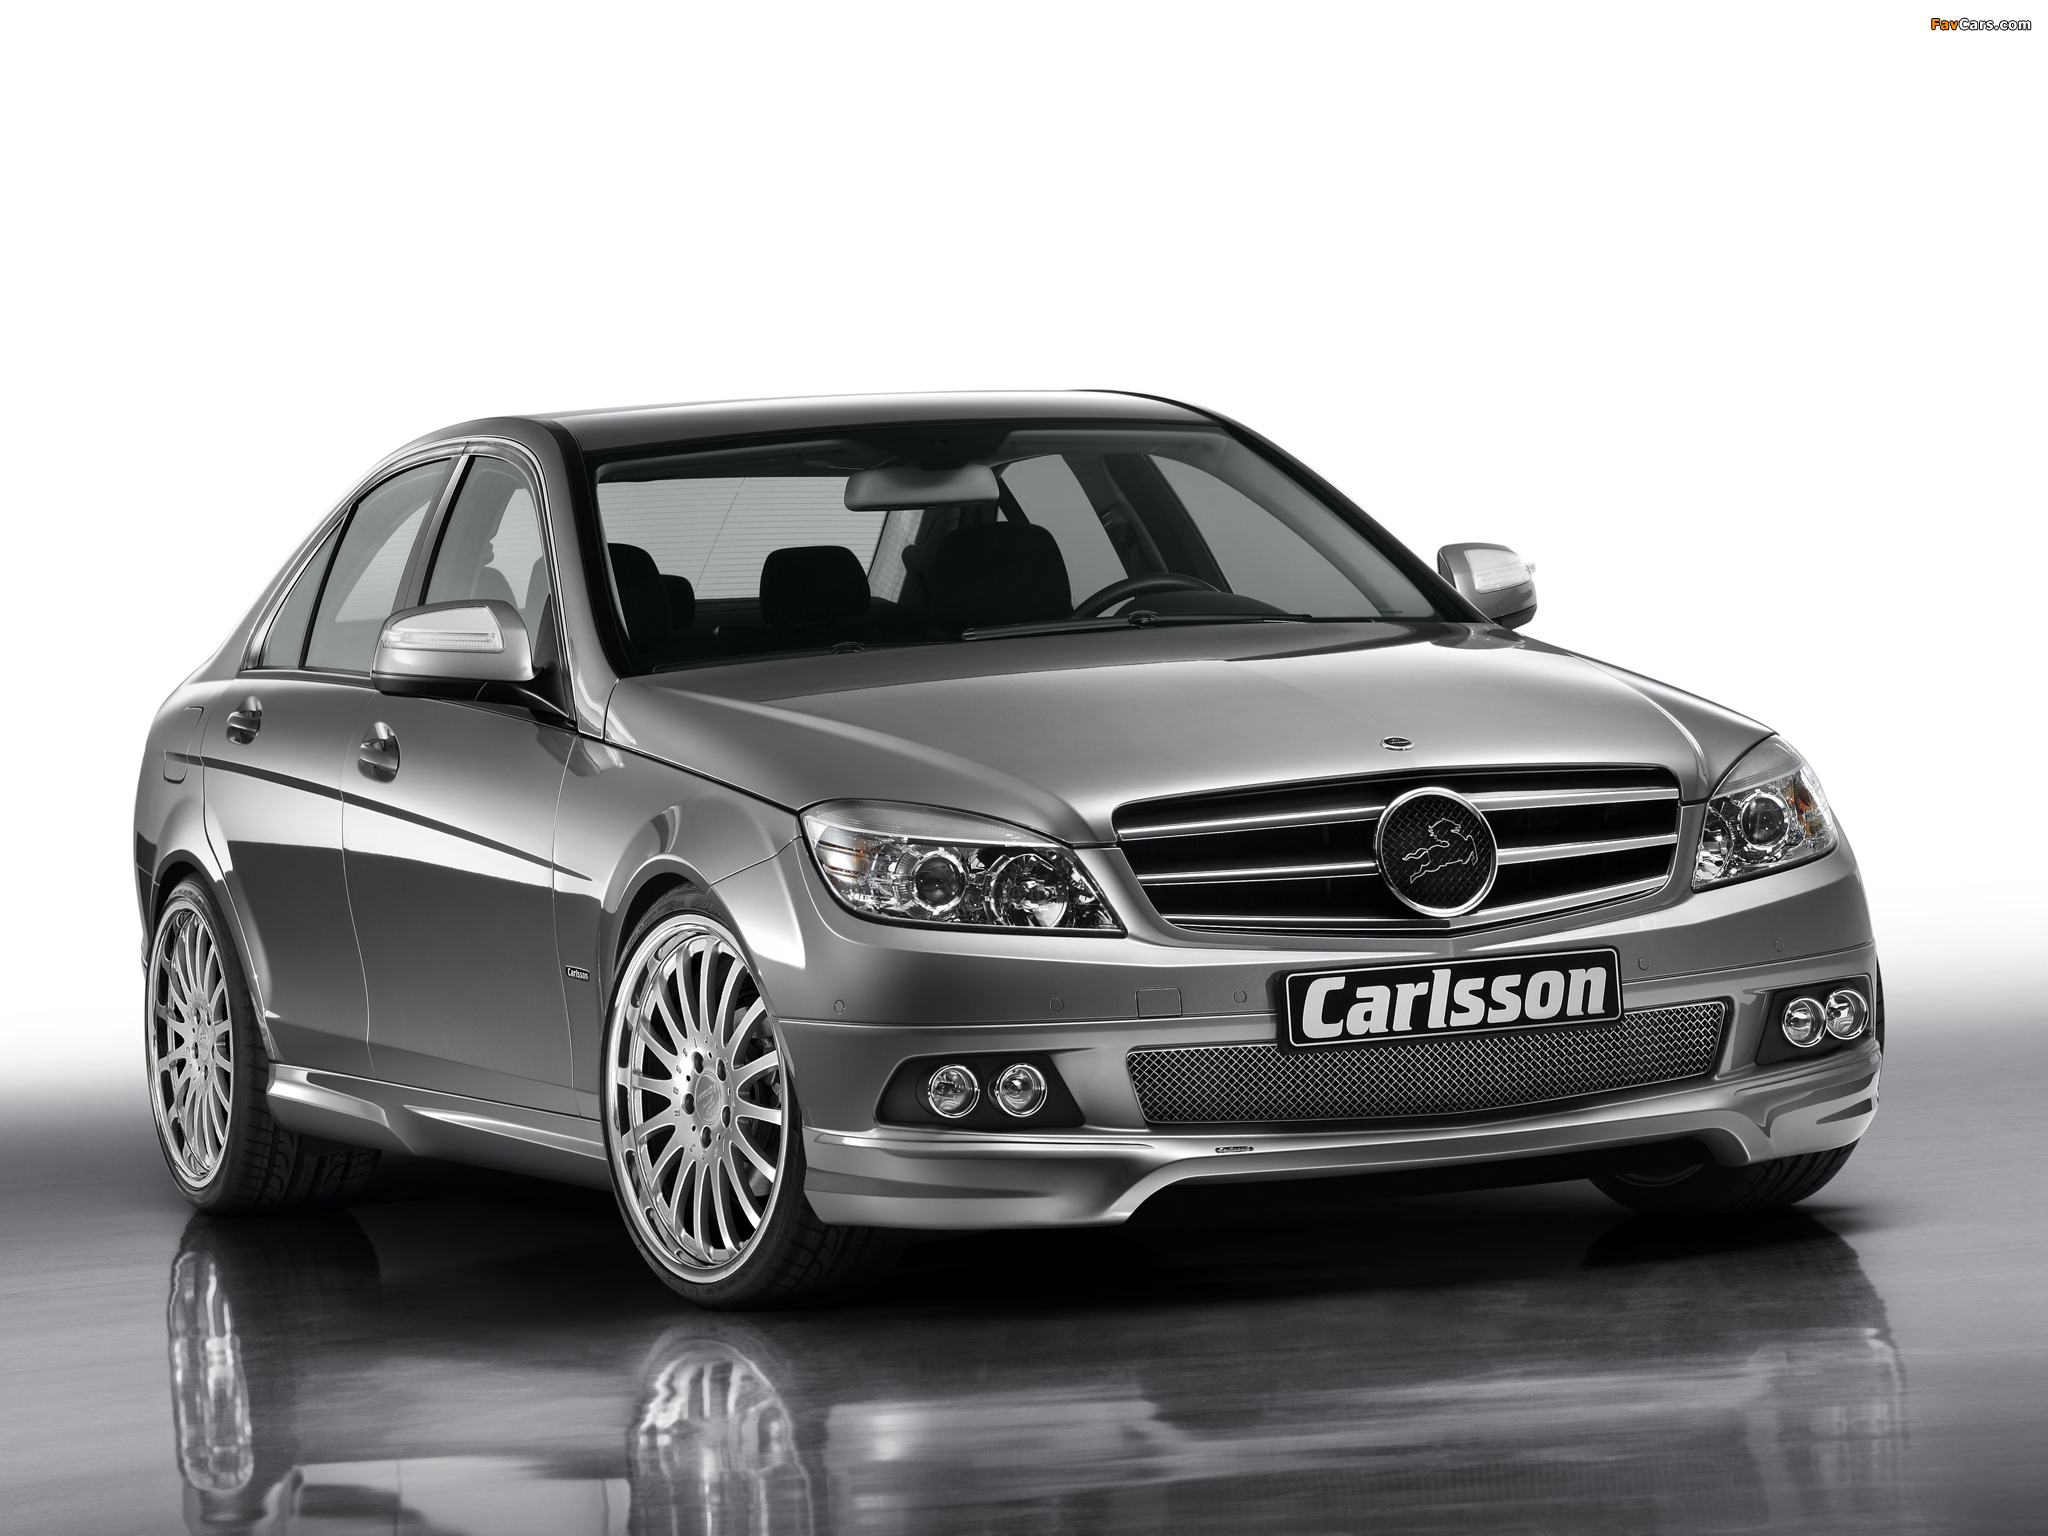 Carlsson CK 35 (W204) 2007 pictures (2048 x 1536)